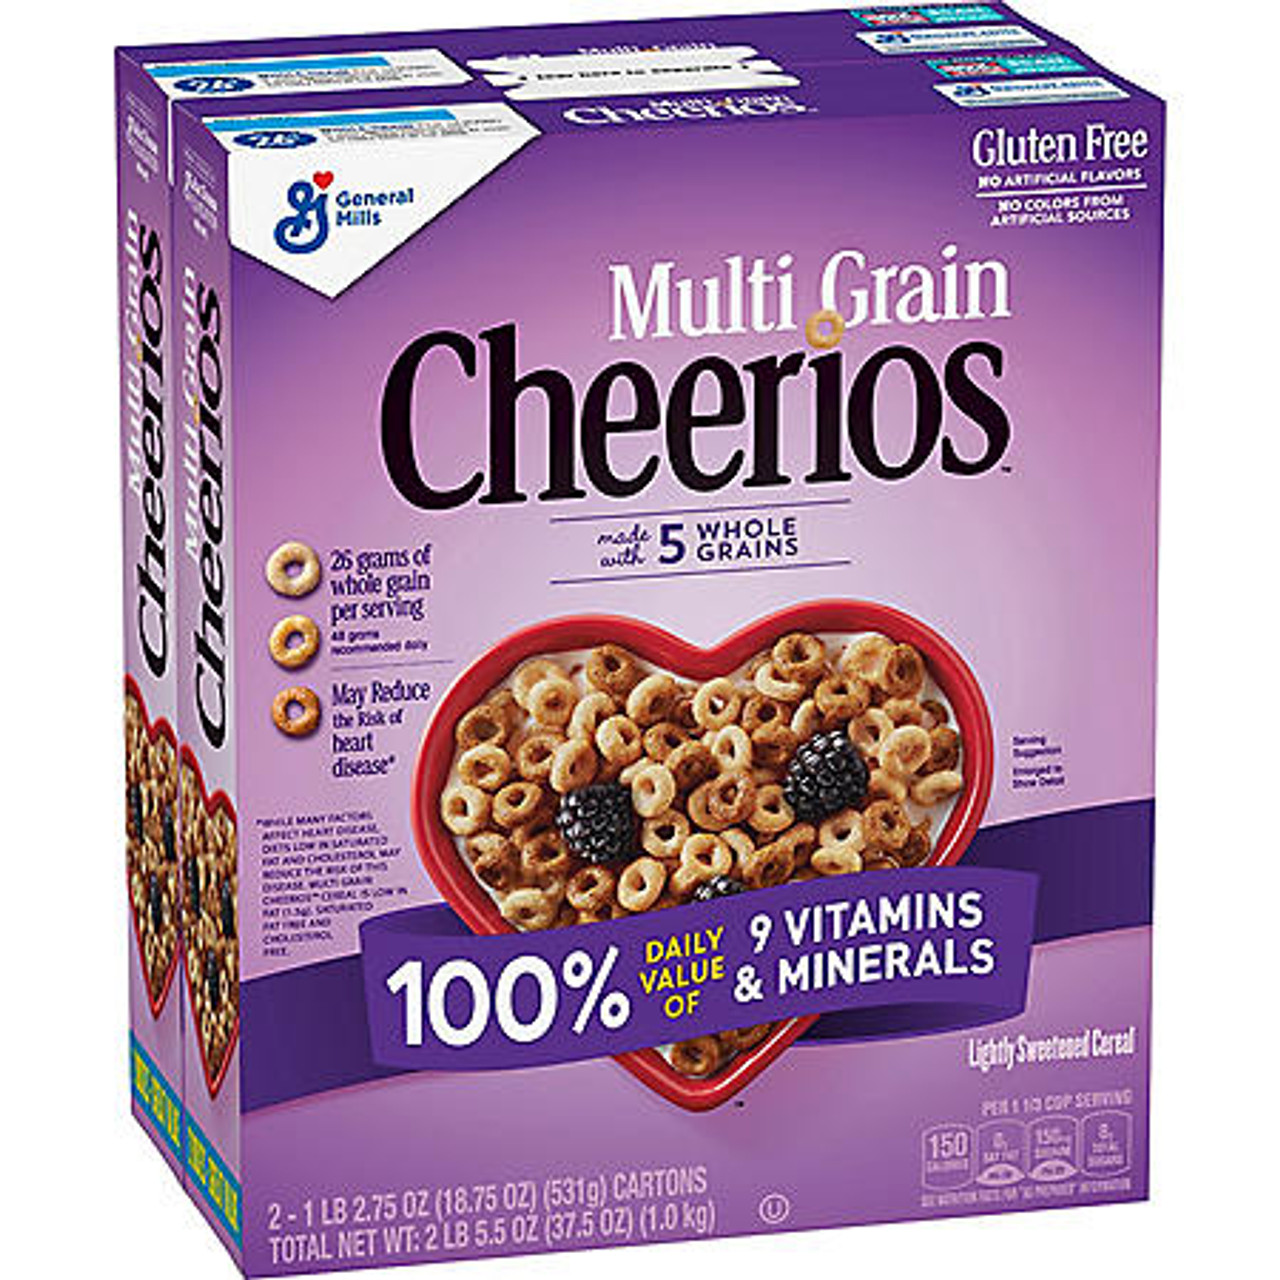 Multi-Grain Cheerios Gluten-Free Cereal (18.75 oz., 2 pk.) - [From 43.00 - Choose pk Qty ] - *Ships from Miami